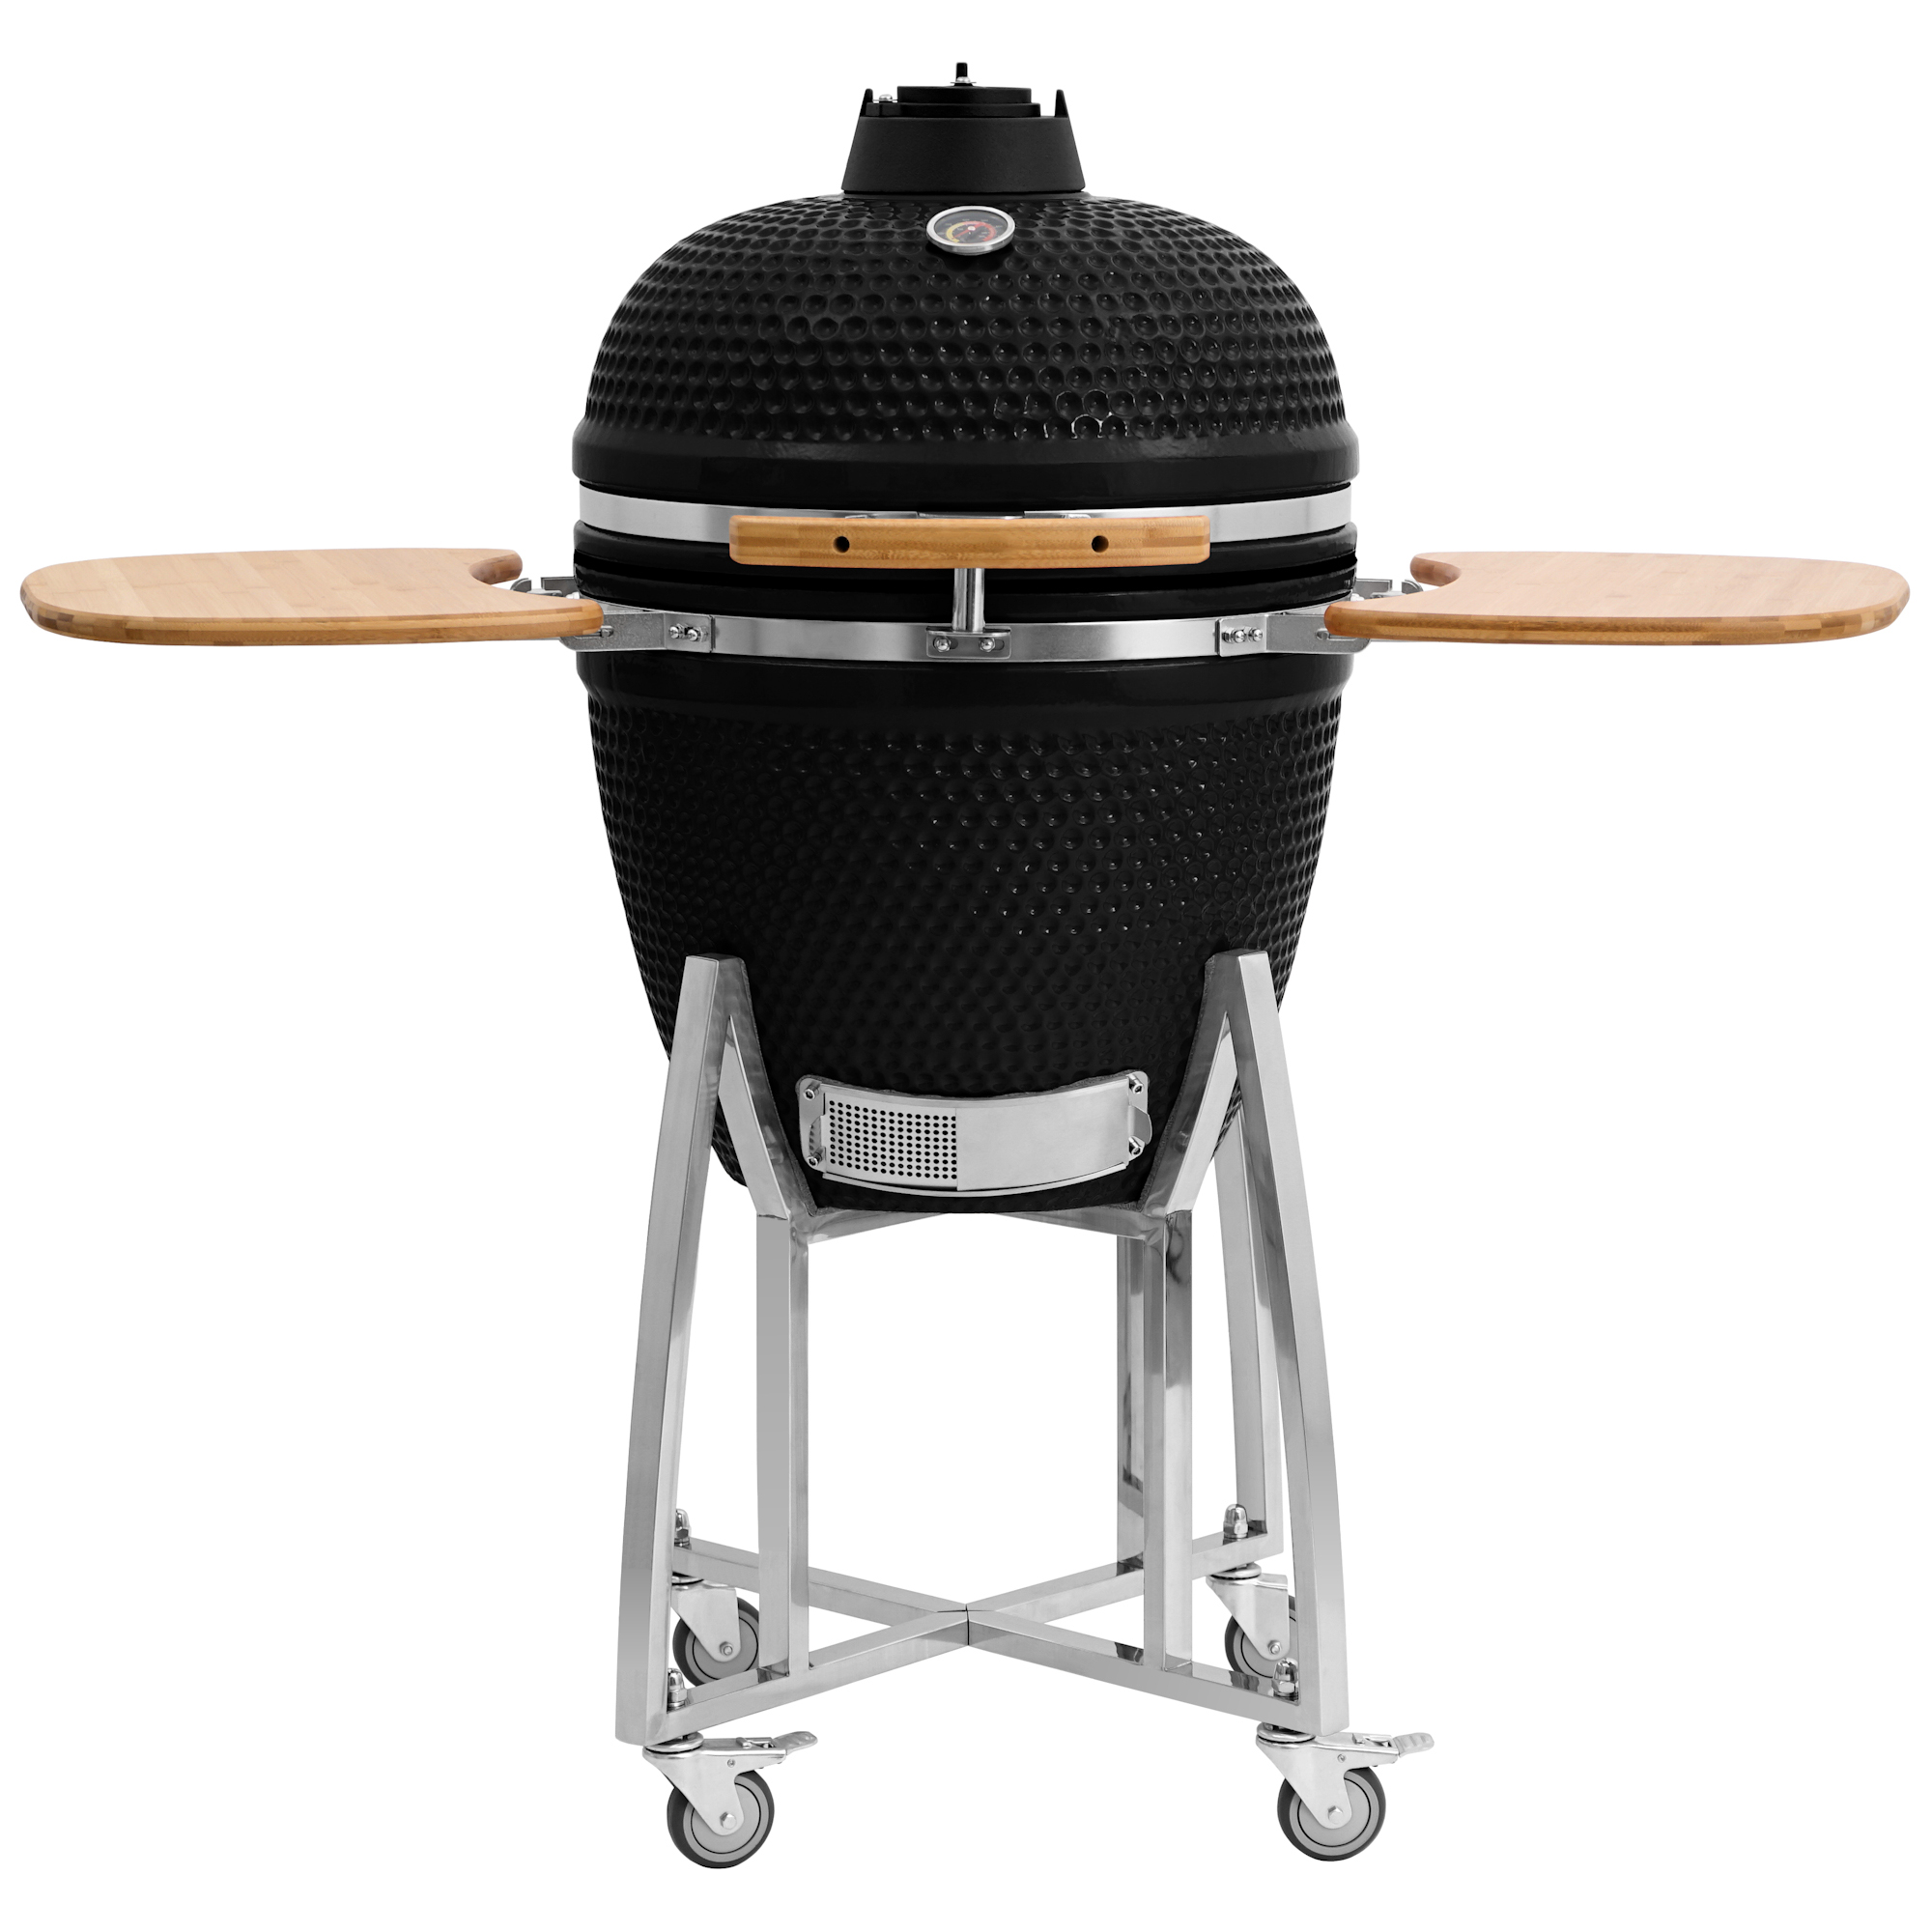 AUPLEX OEM Parrilla Kamado Grill Design Ceramic Outdoor barbecue 21Inch Charcoal Bbq Grills For Garden Featured Image